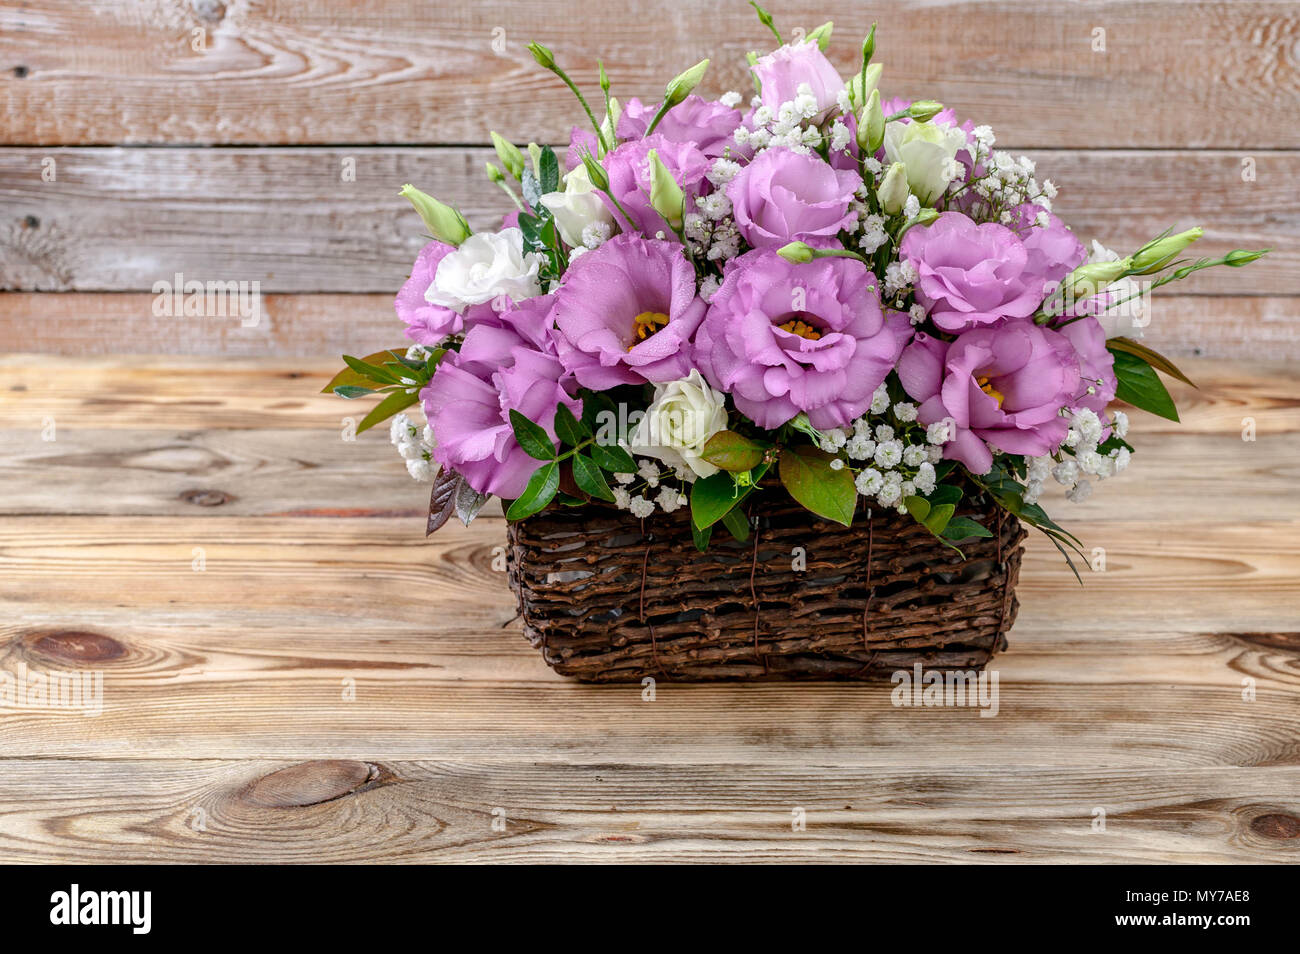 Bouquet of flowers in a basket on a wooden background. Stock Photo